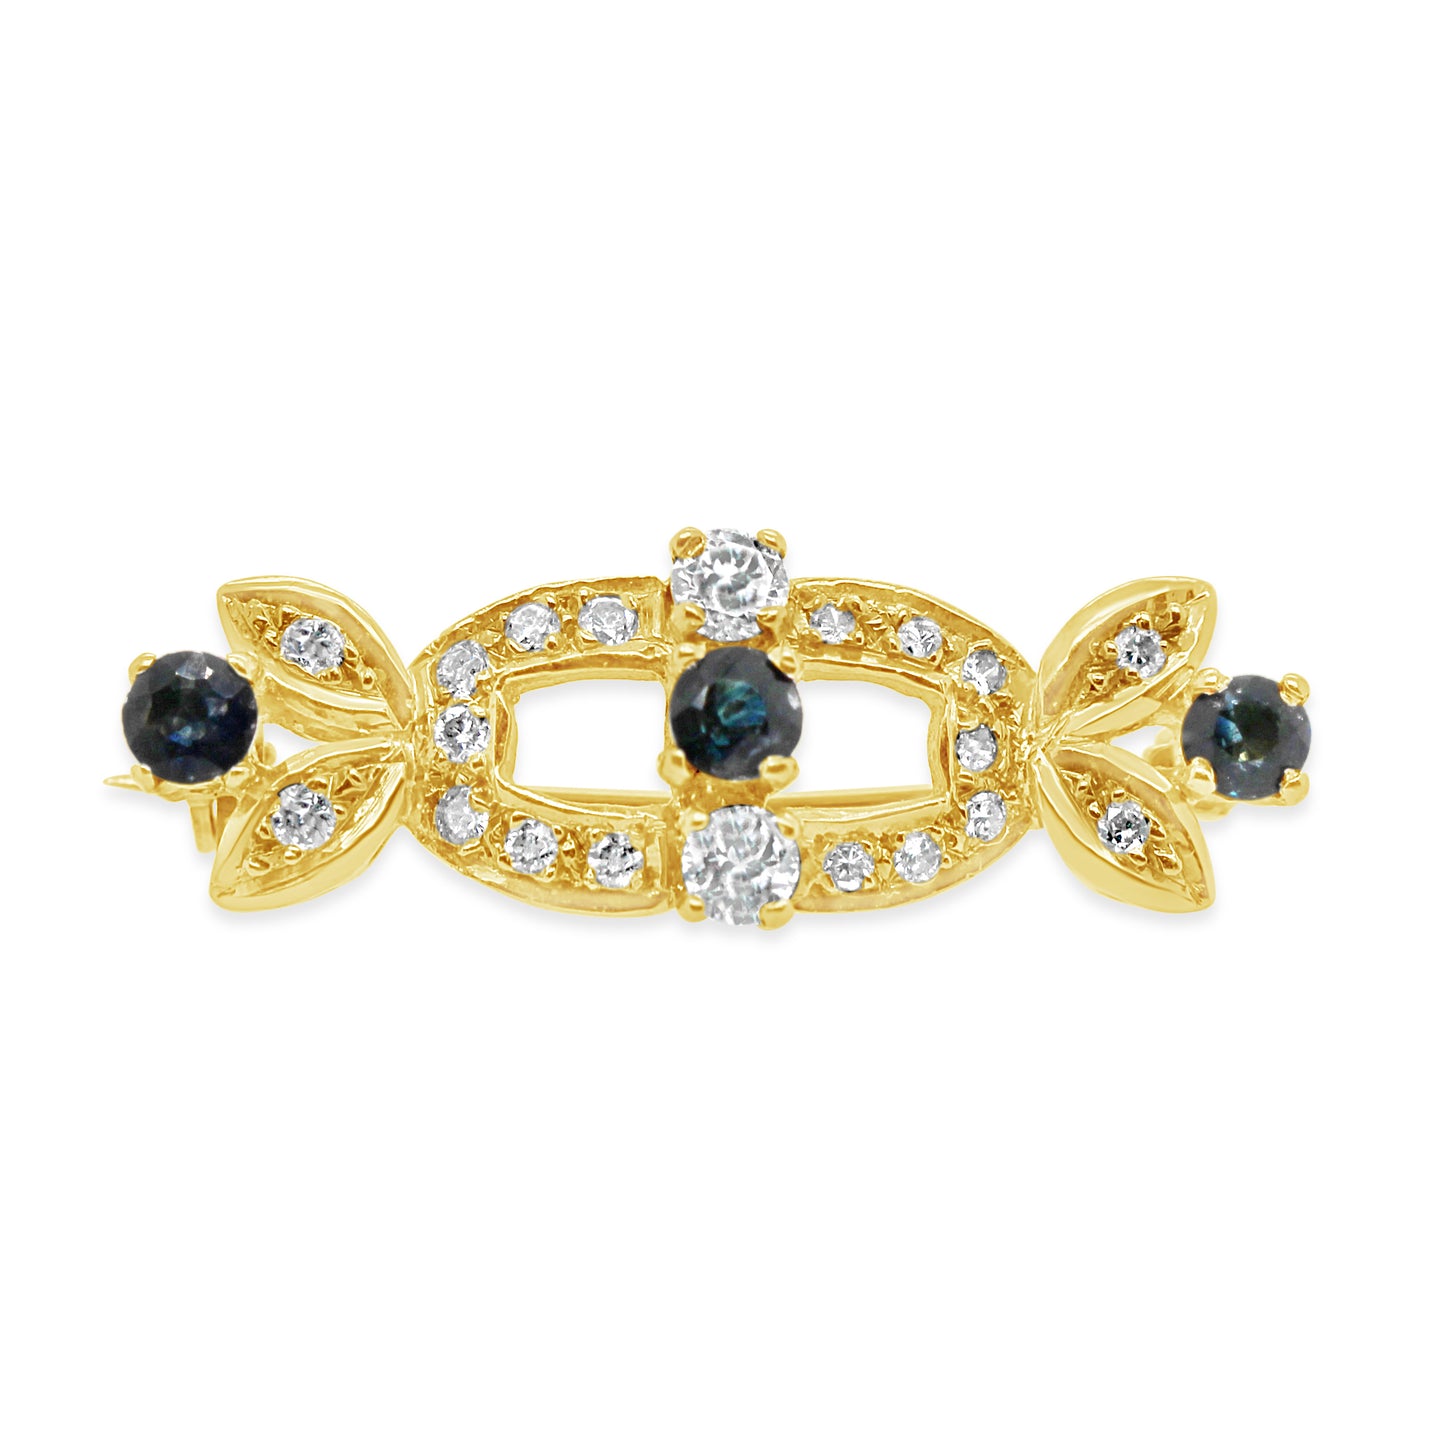 18K Yellow Gold Diamond and Sapphire Vintage Brooch